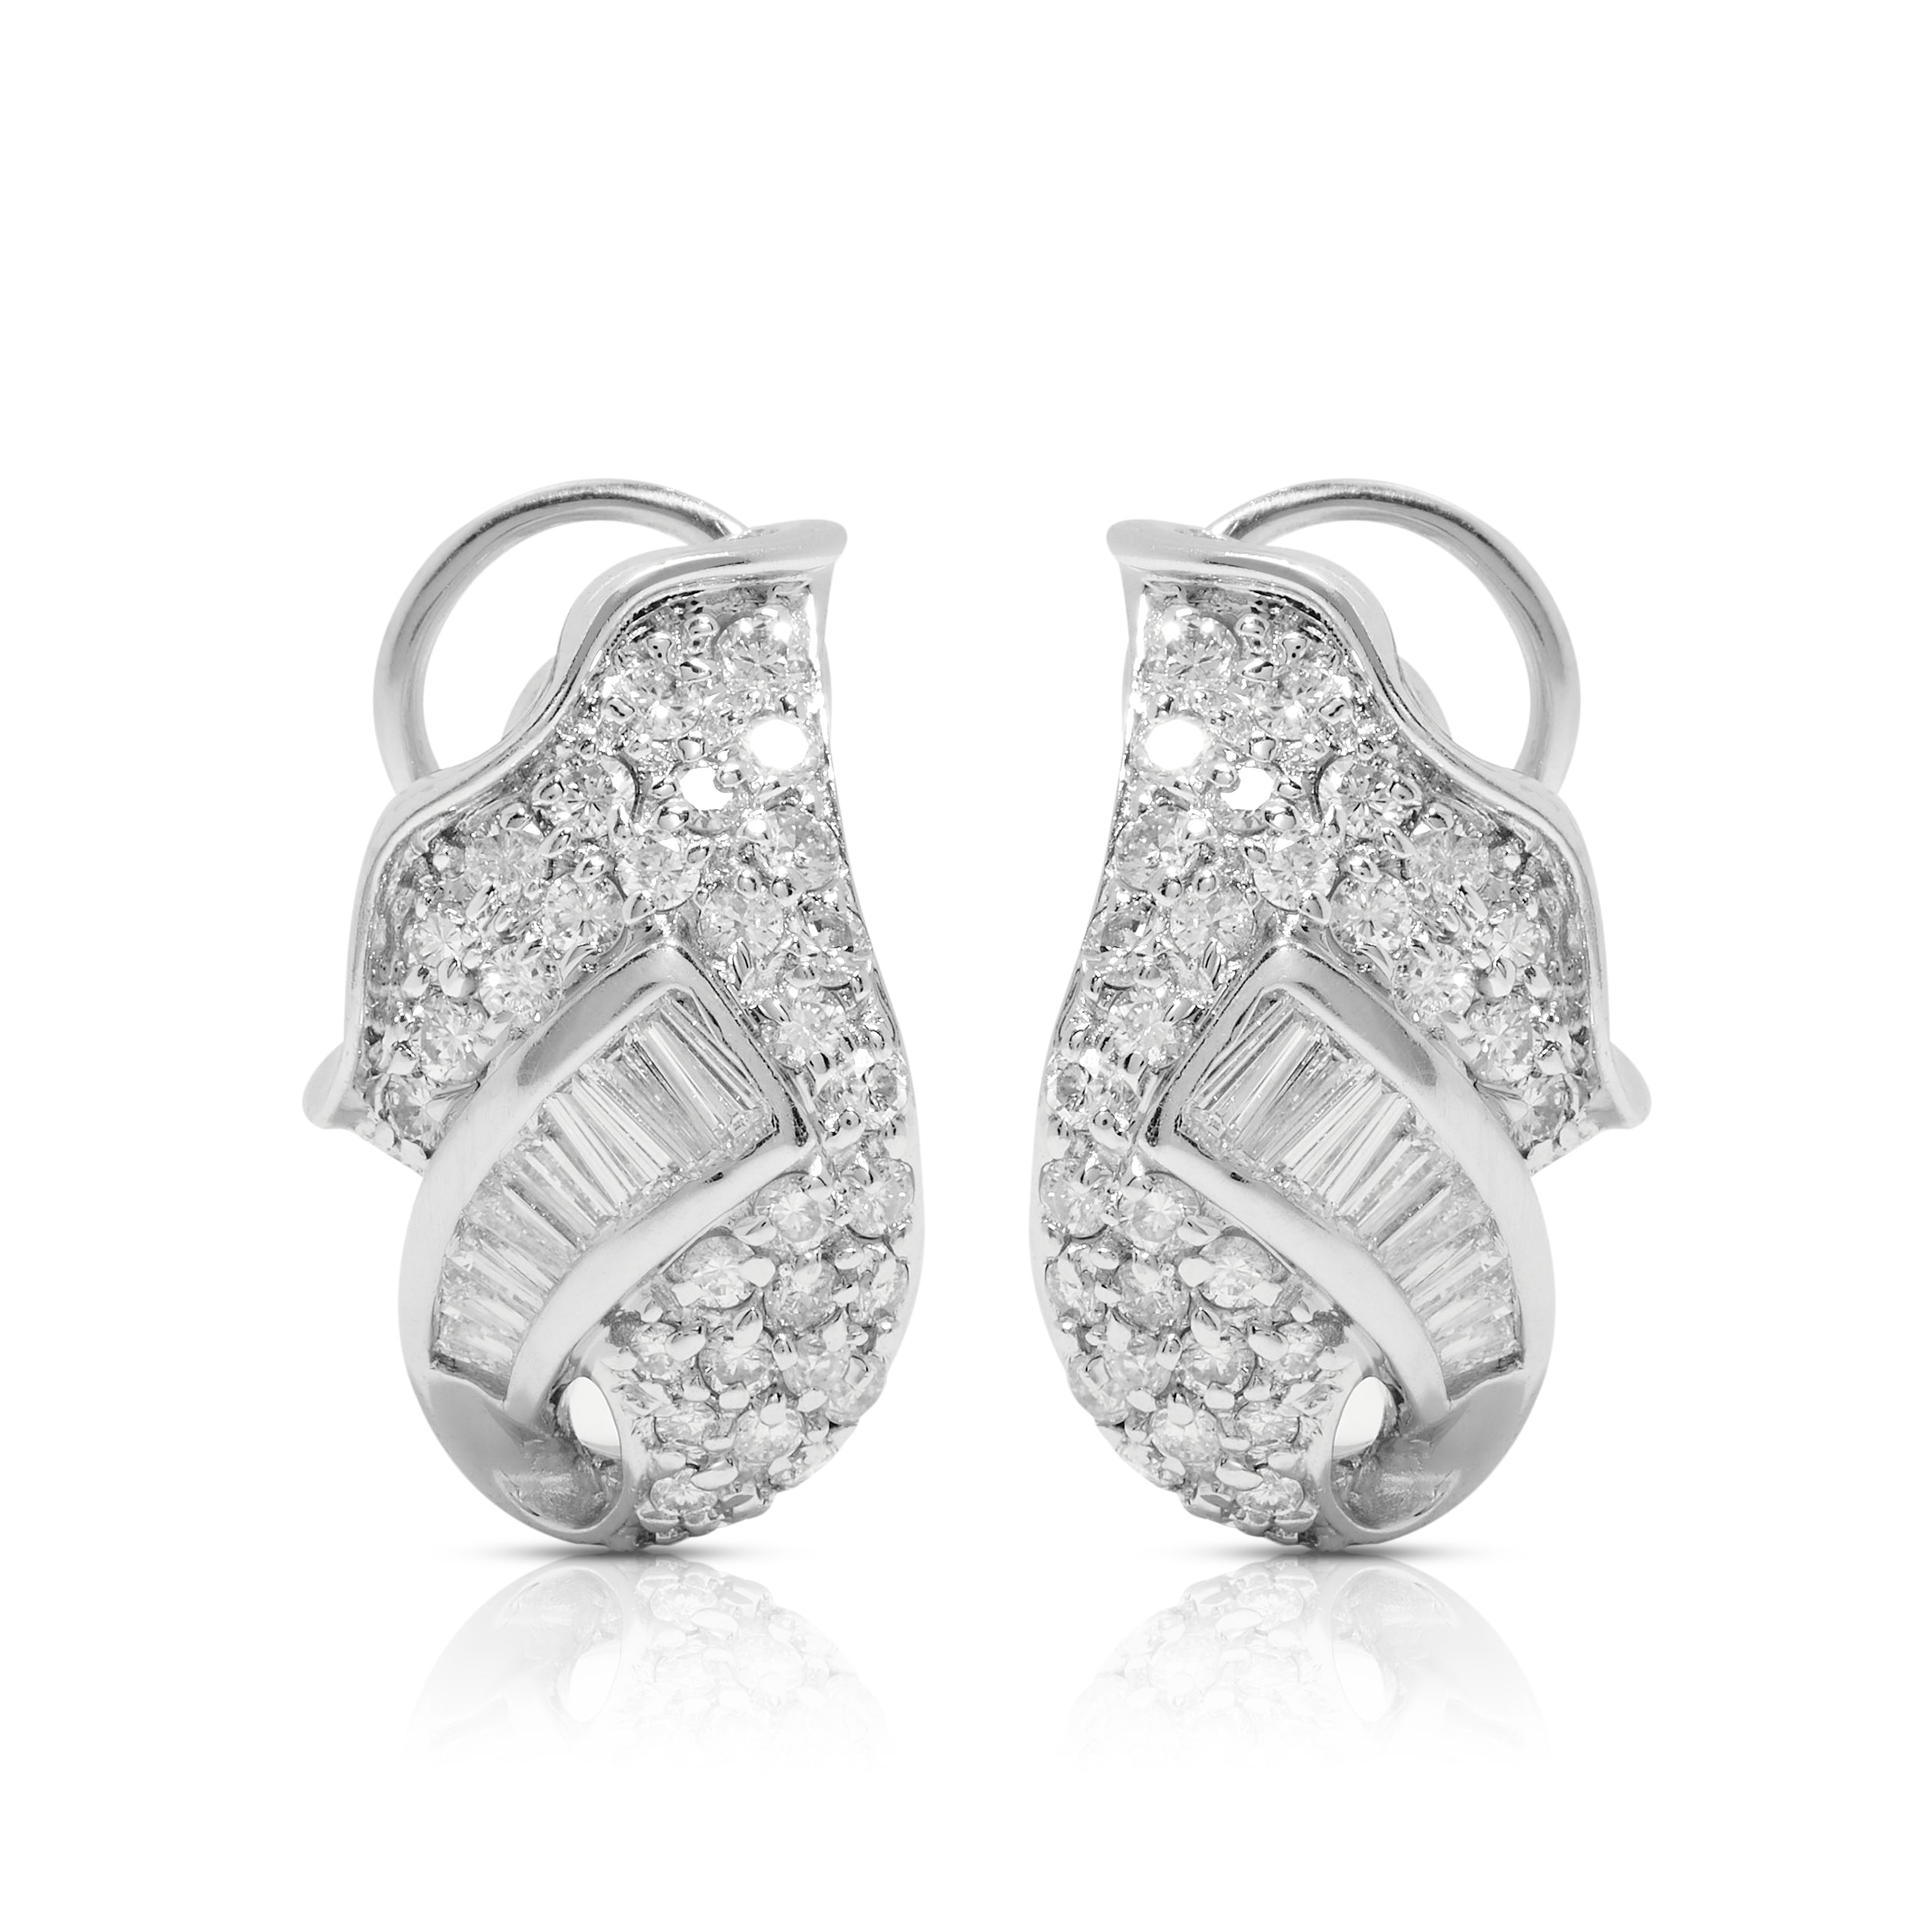 Estate 18ct white gold earrings in angel wing design with pavé diamonds.